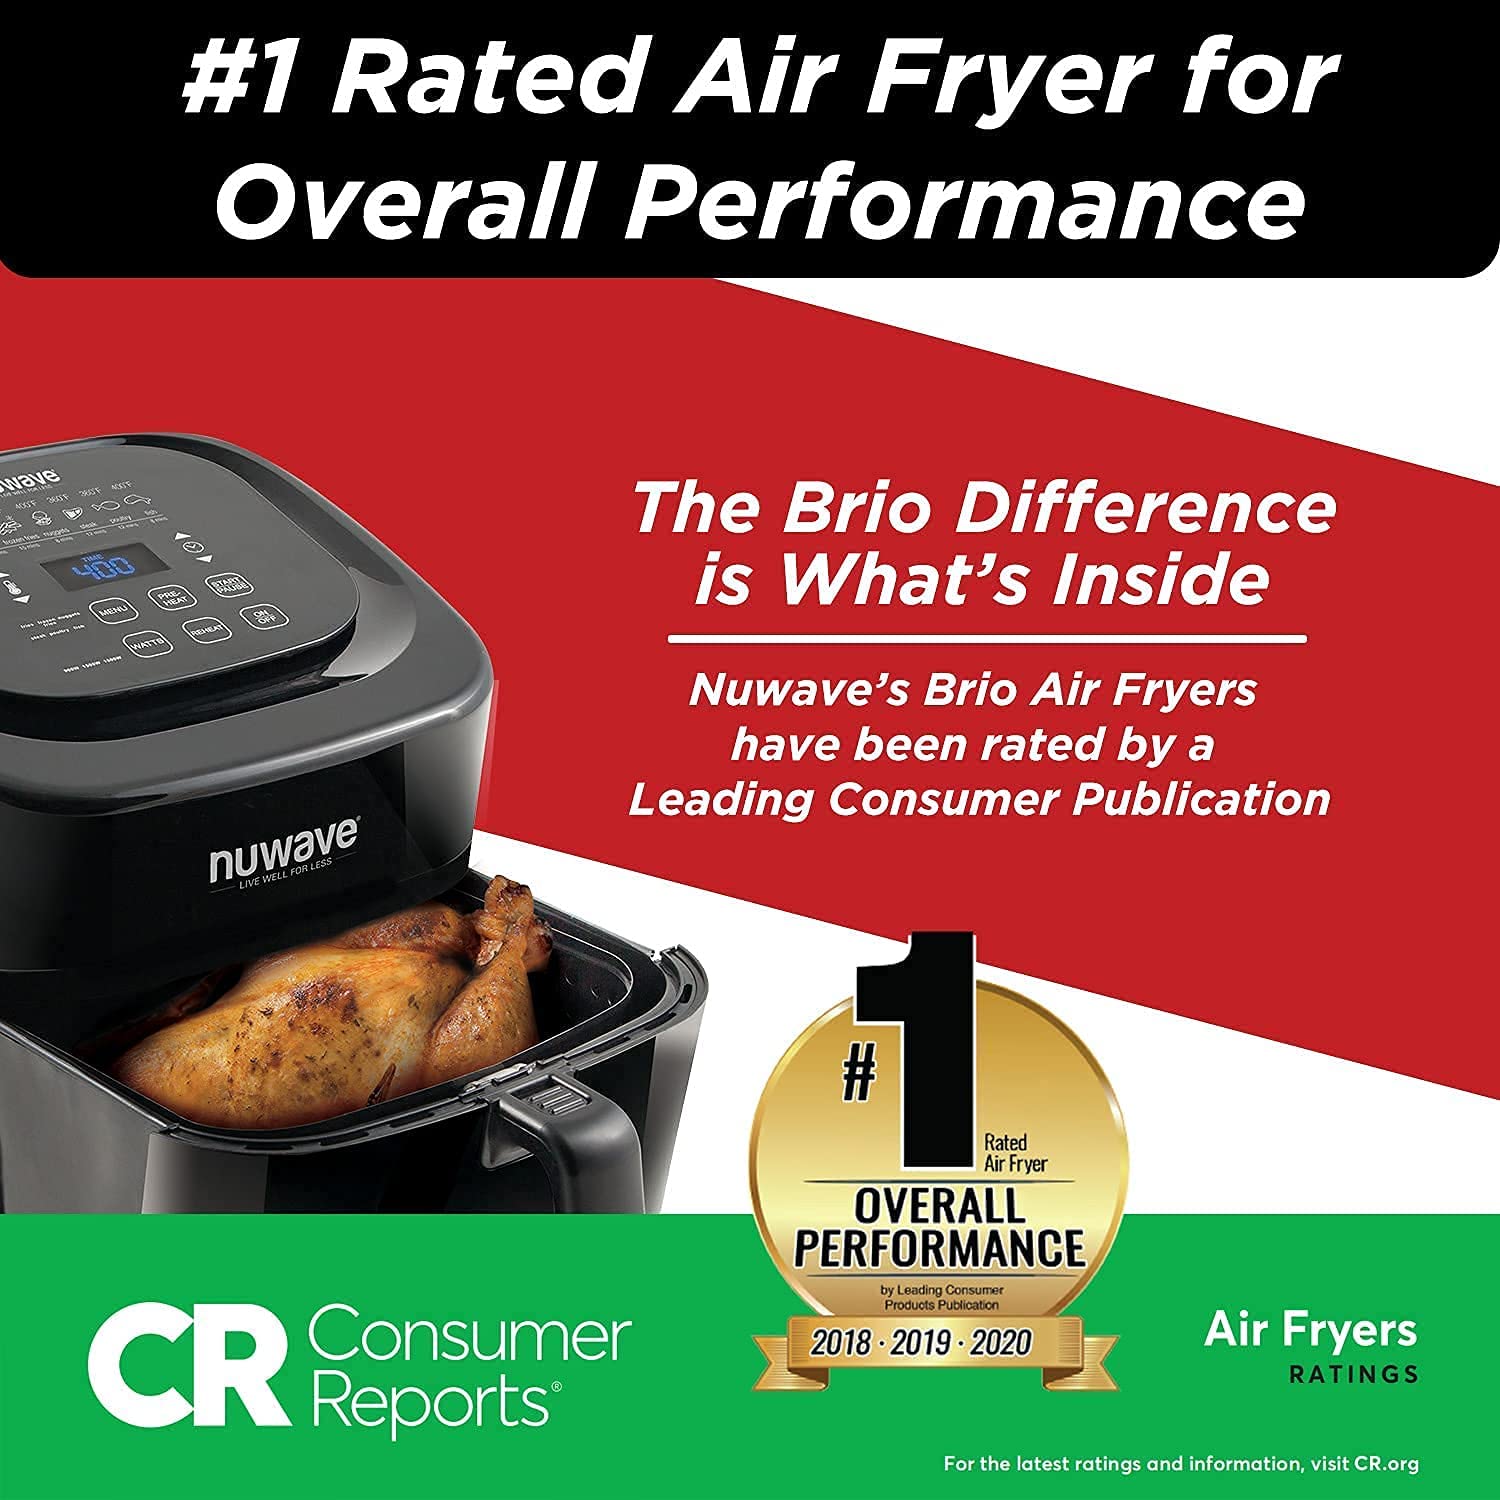 Nuwave (Renewed) 6-quart Brio Healthy Digital Air Fryer with One-Touch Digital Controls, 6 Preset Menu Functions & Removable Divider Insert